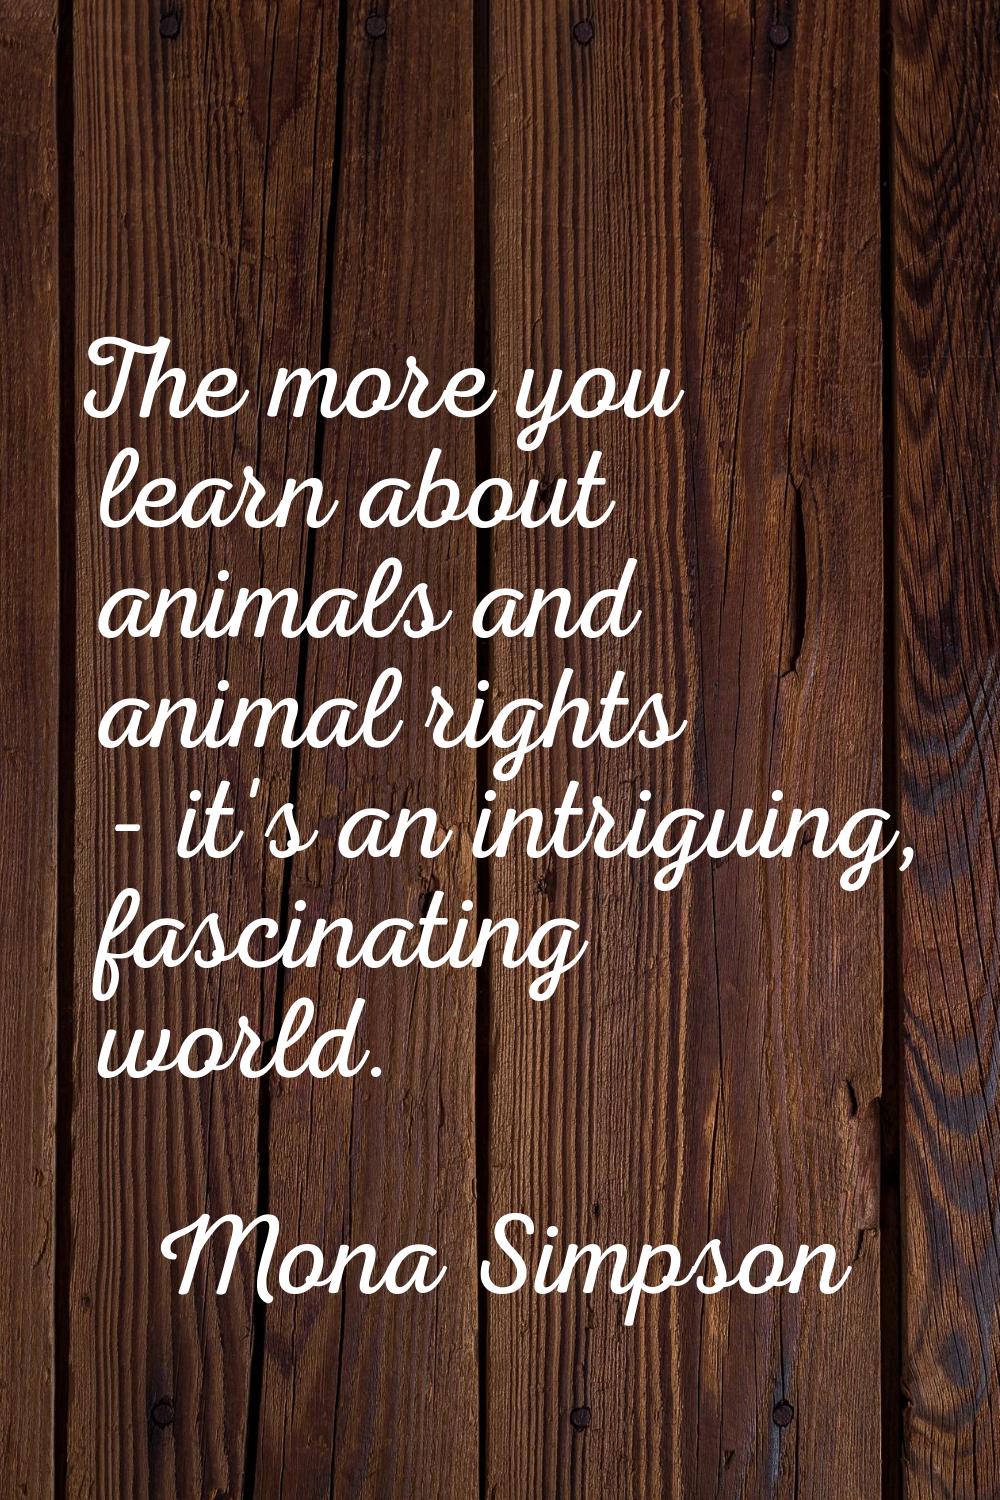 The more you learn about animals and animal rights - it's an intriguing, fascinating world.